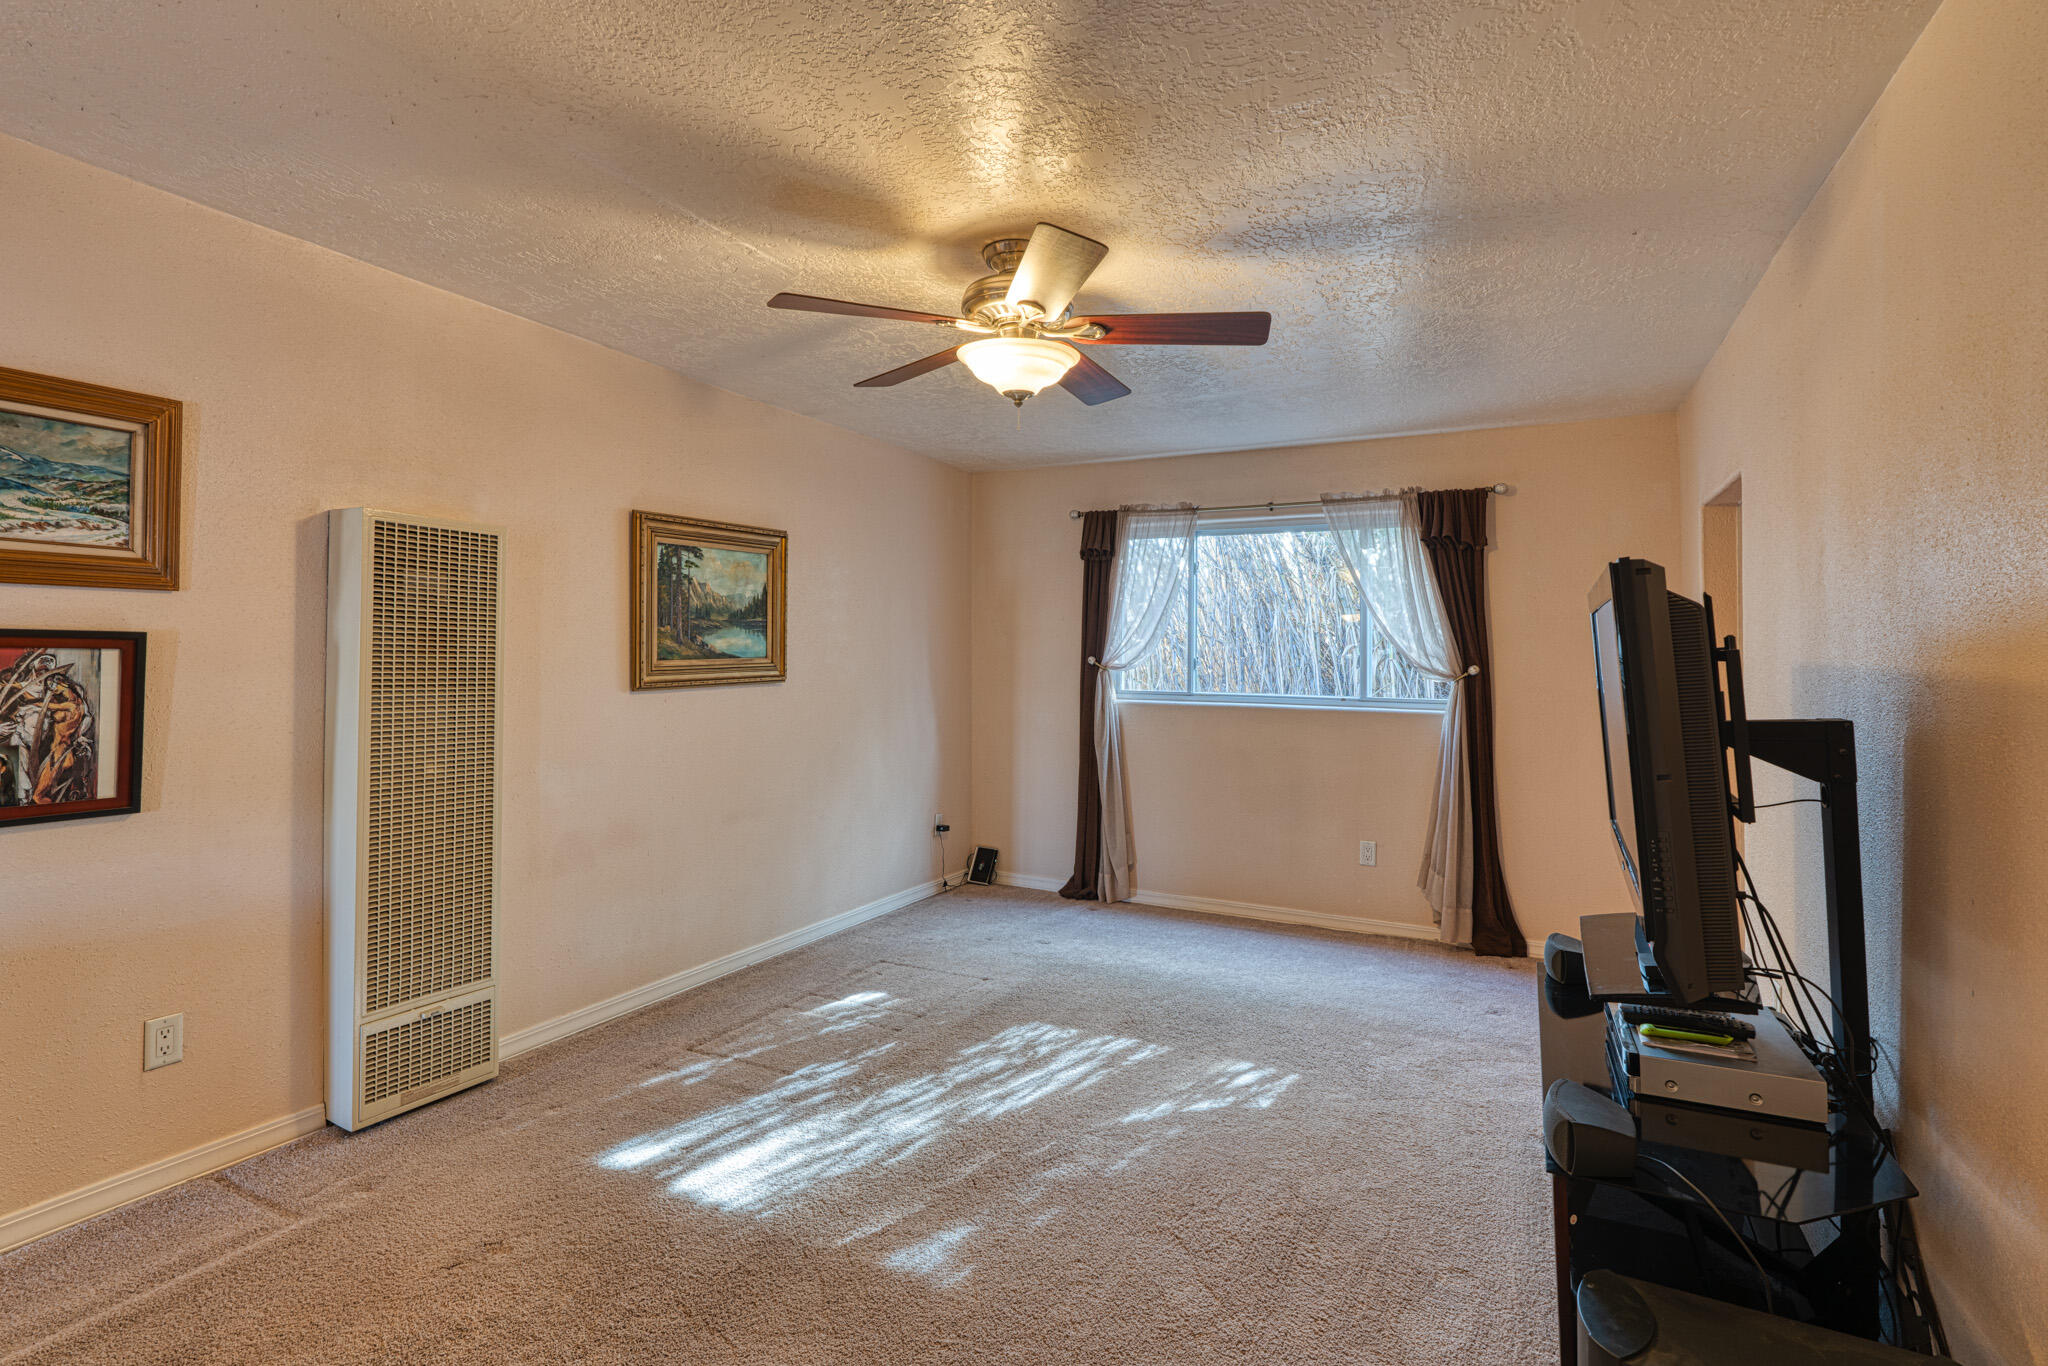 3006 9th Street NW, Albuquerque, New Mexico 87107, 3 Bedrooms Bedrooms, ,1 BathroomBathrooms,Residential,For Sale,3006 9th Street NW,1059827